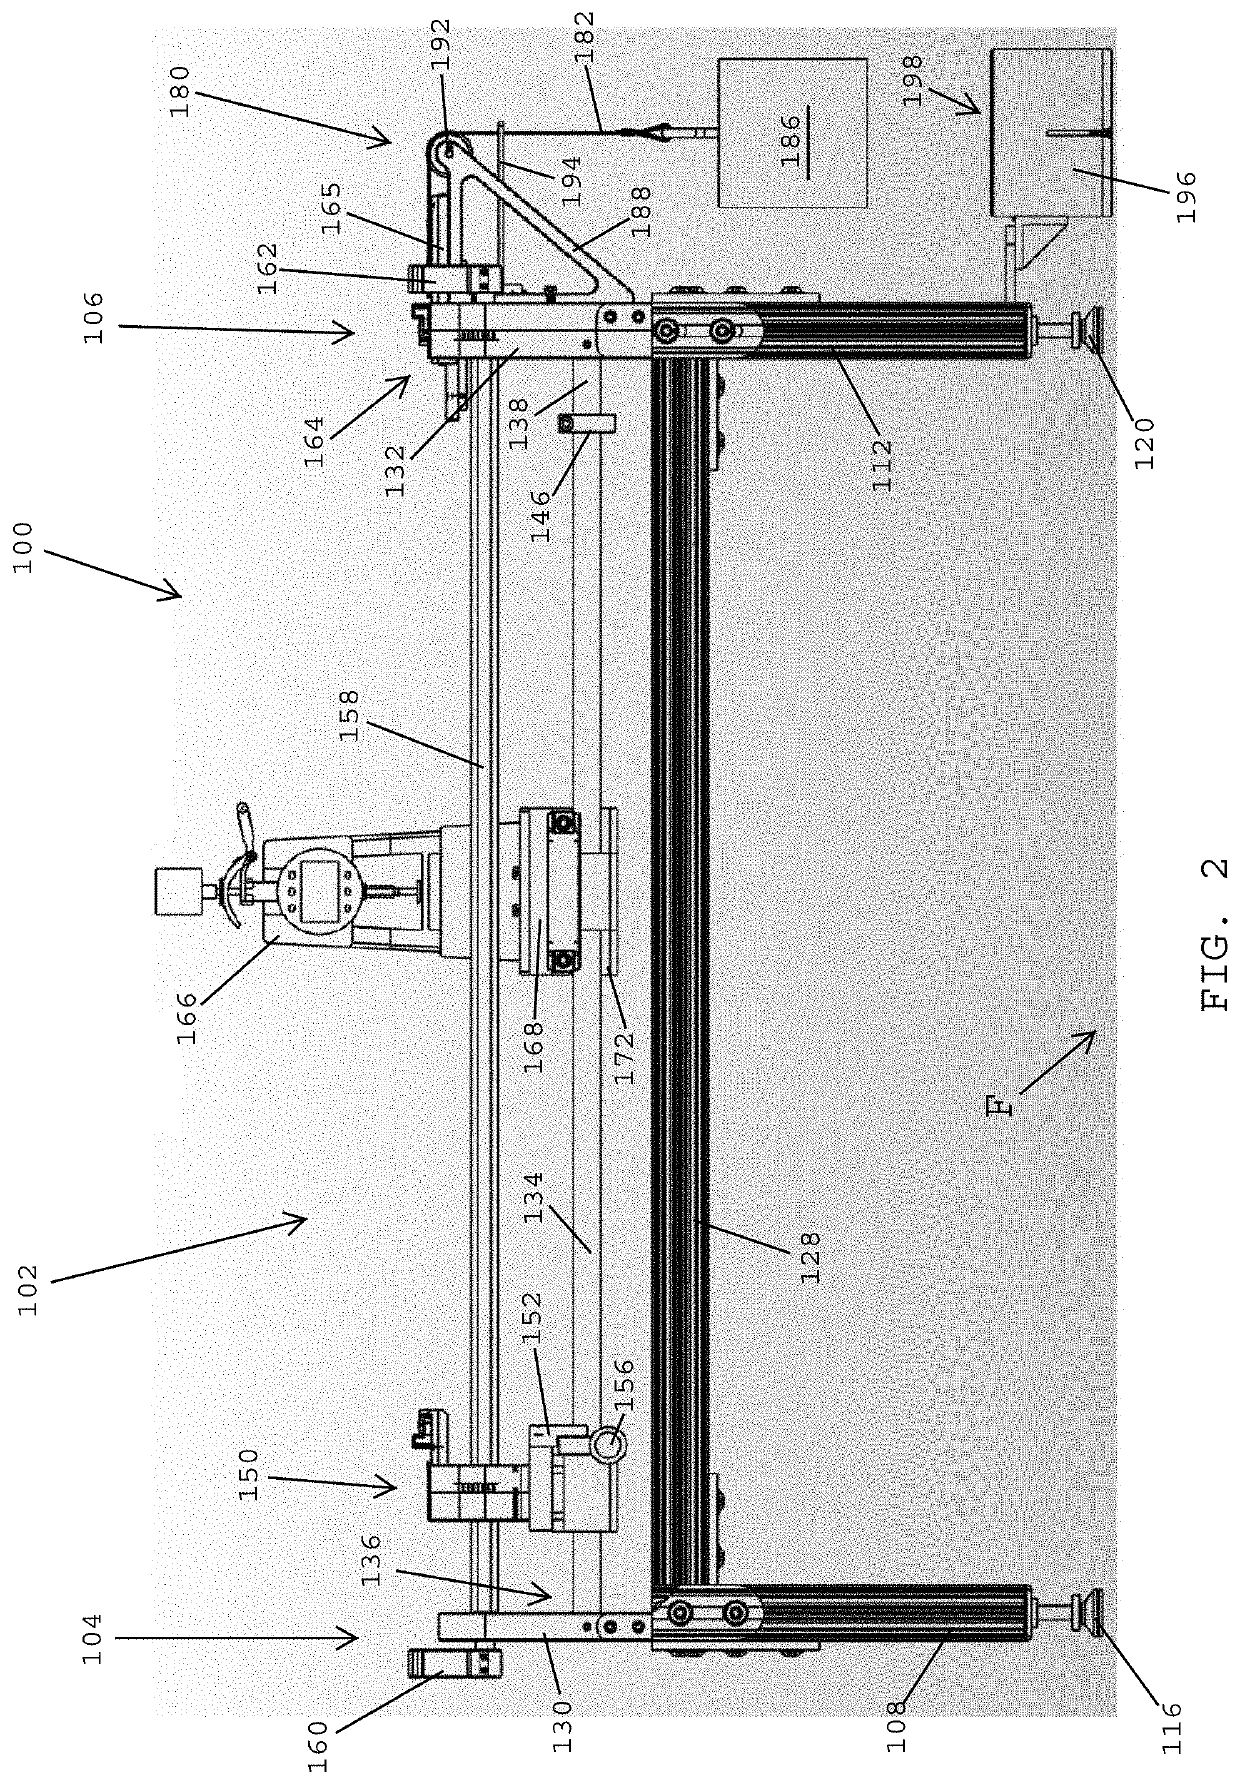 Systems, devices and methods for consistently and uniformly measuring the diameters of sutures